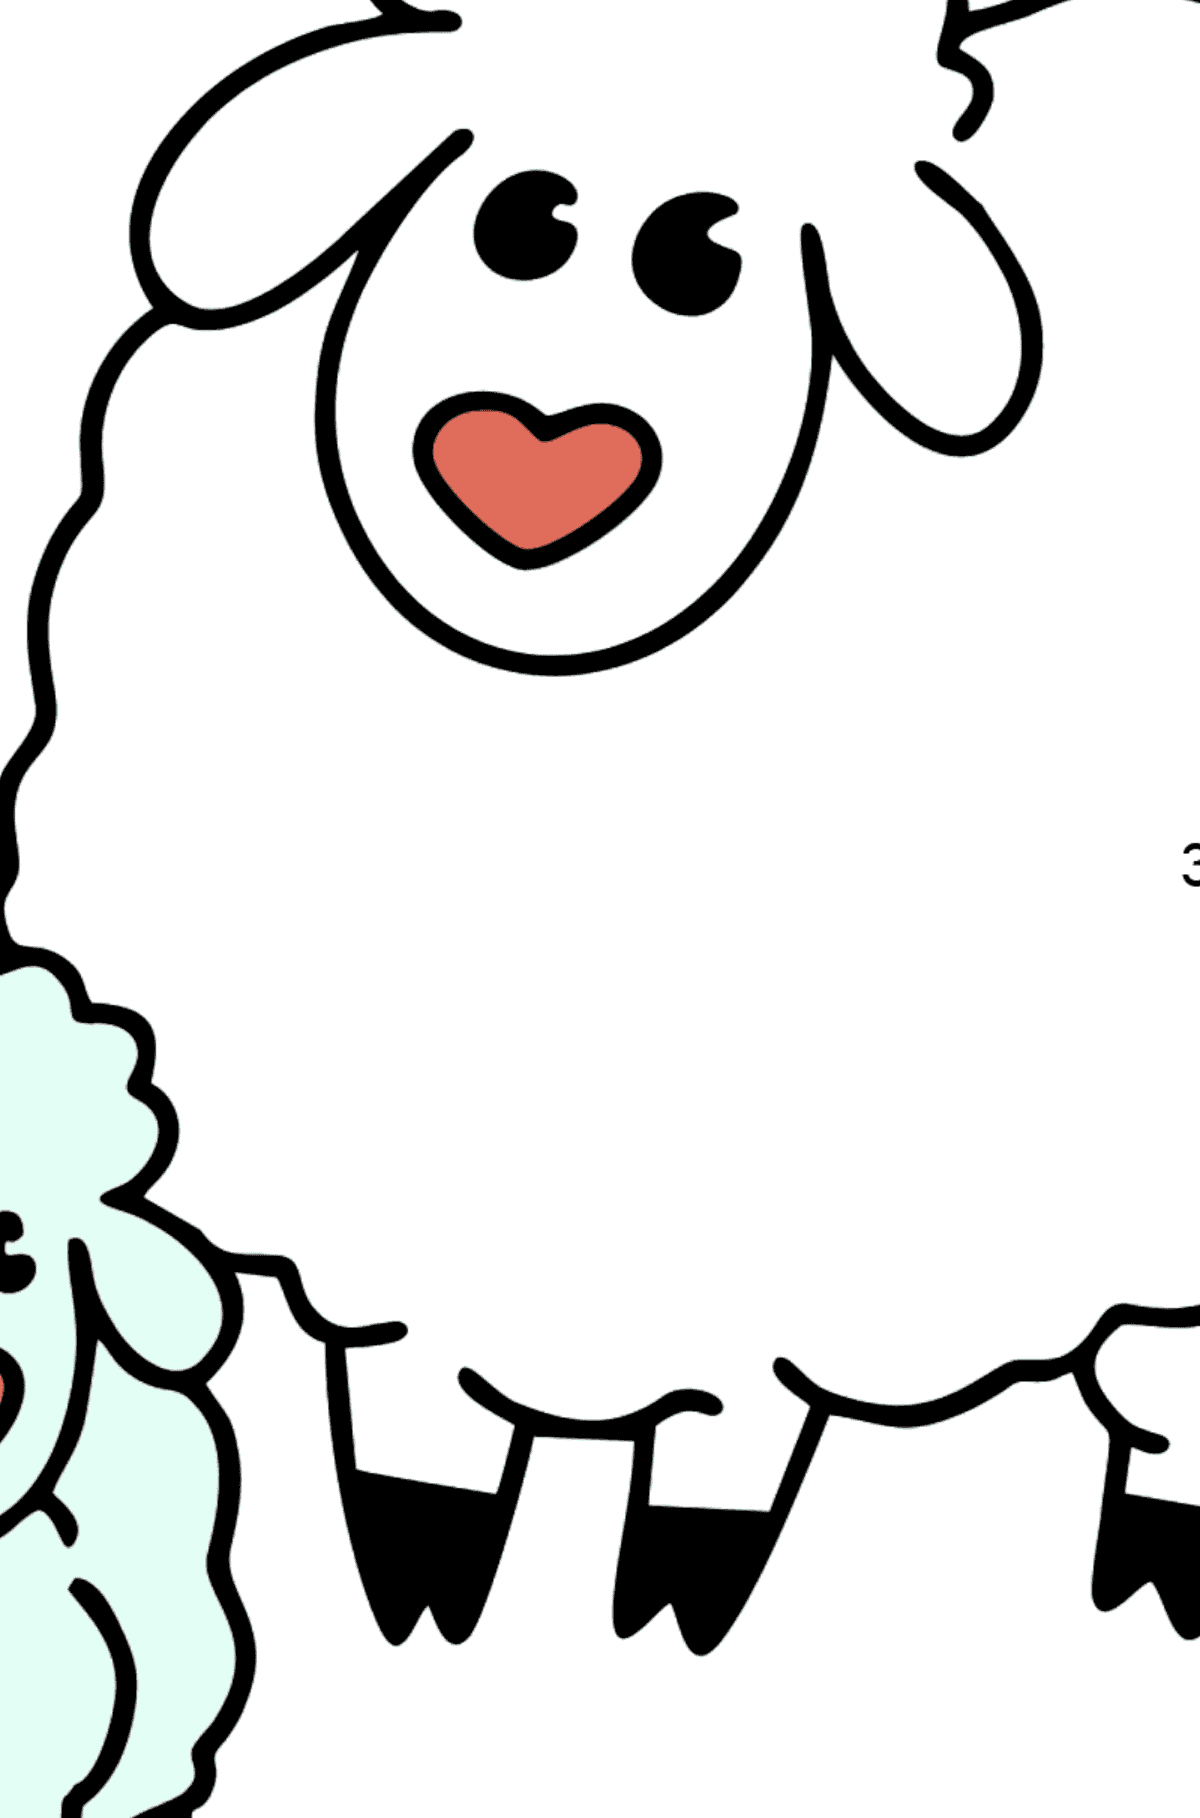 Sheep with Lamb coloring page - Math Coloring - Multiplication for Kids